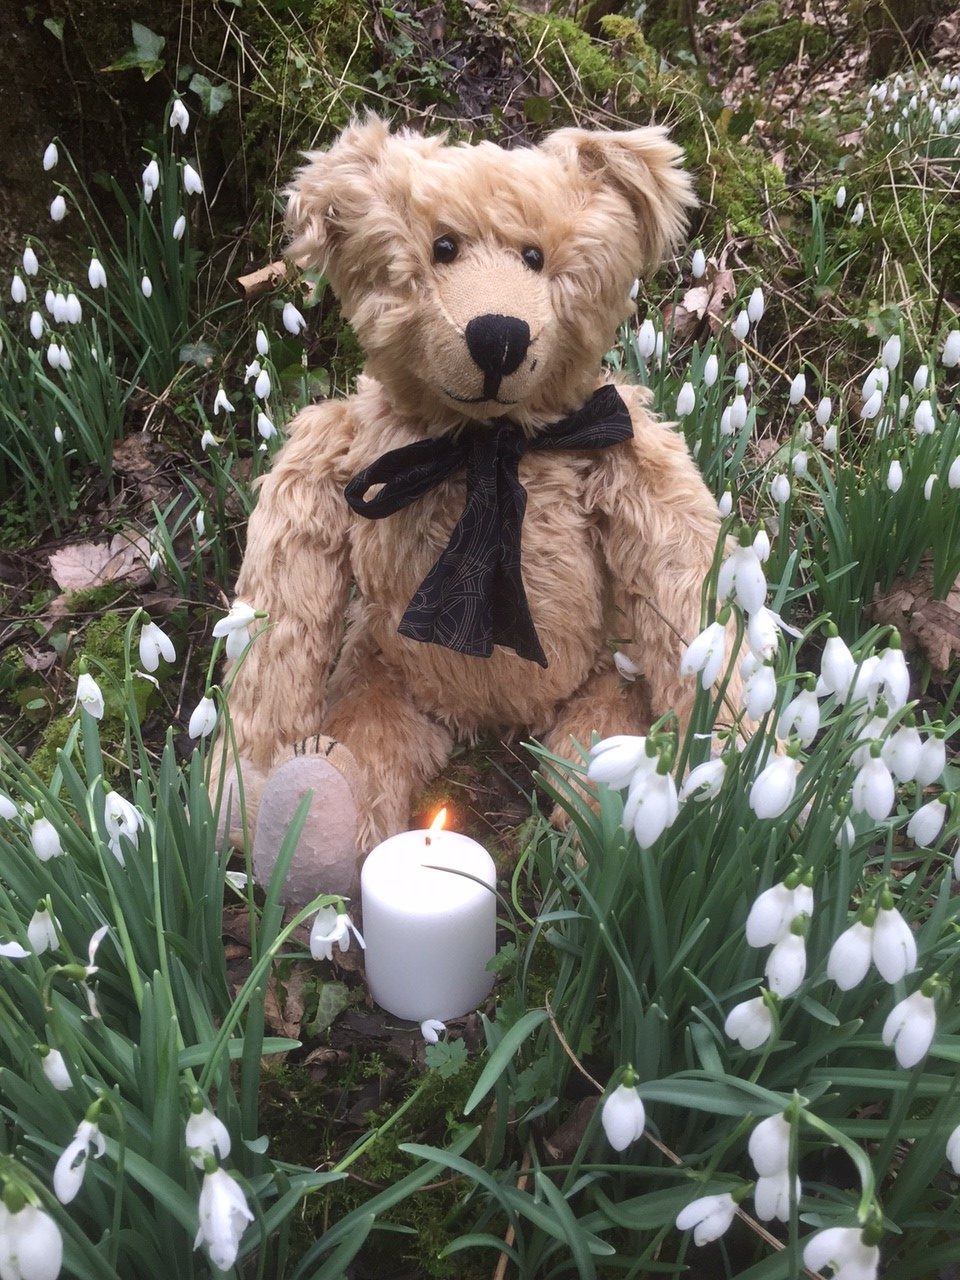 Snowdrops: Lighting a Candle to Diddley at Cherington Lake